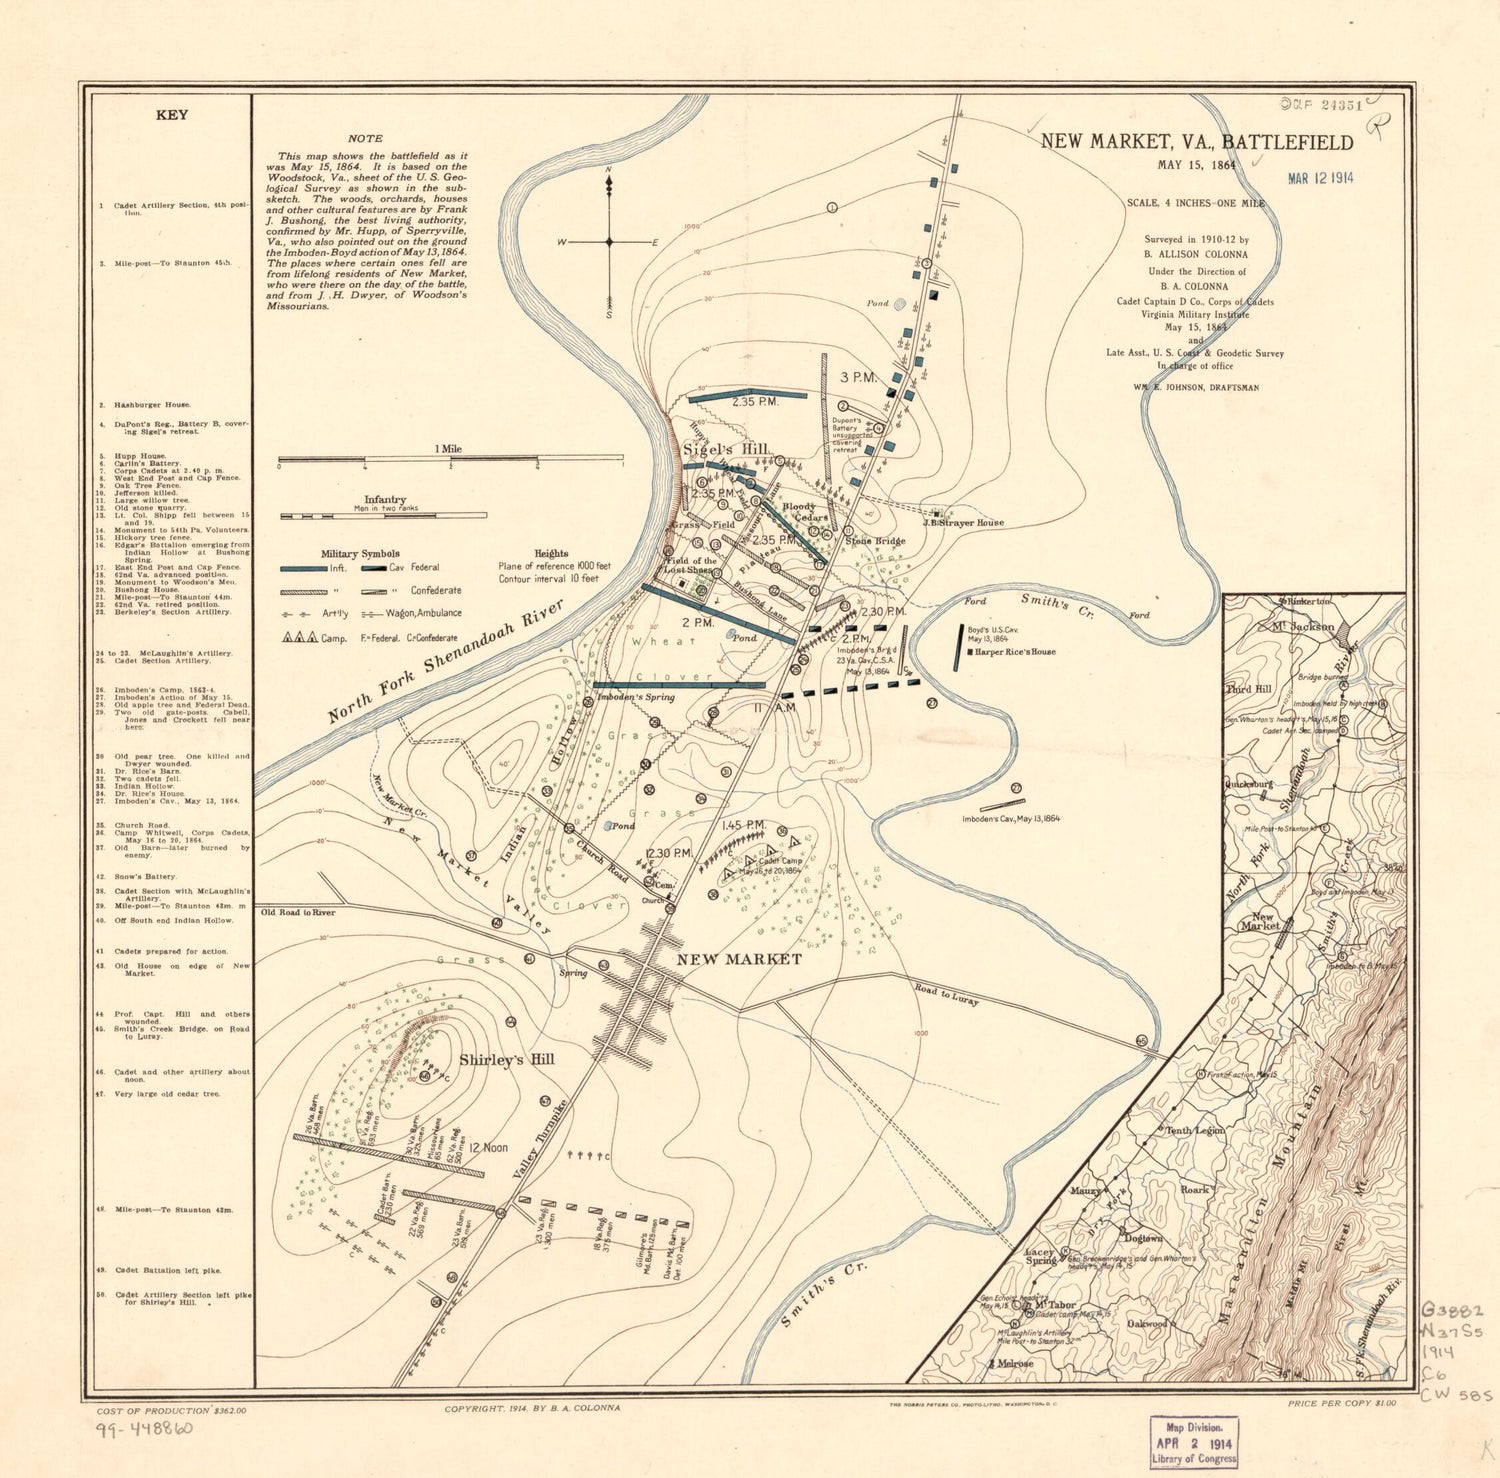 This old map of New Market, Va., Battlefield May 15, 1864 from 1914 was created by B. A. (Benjamin Allison) Colonna in 1914